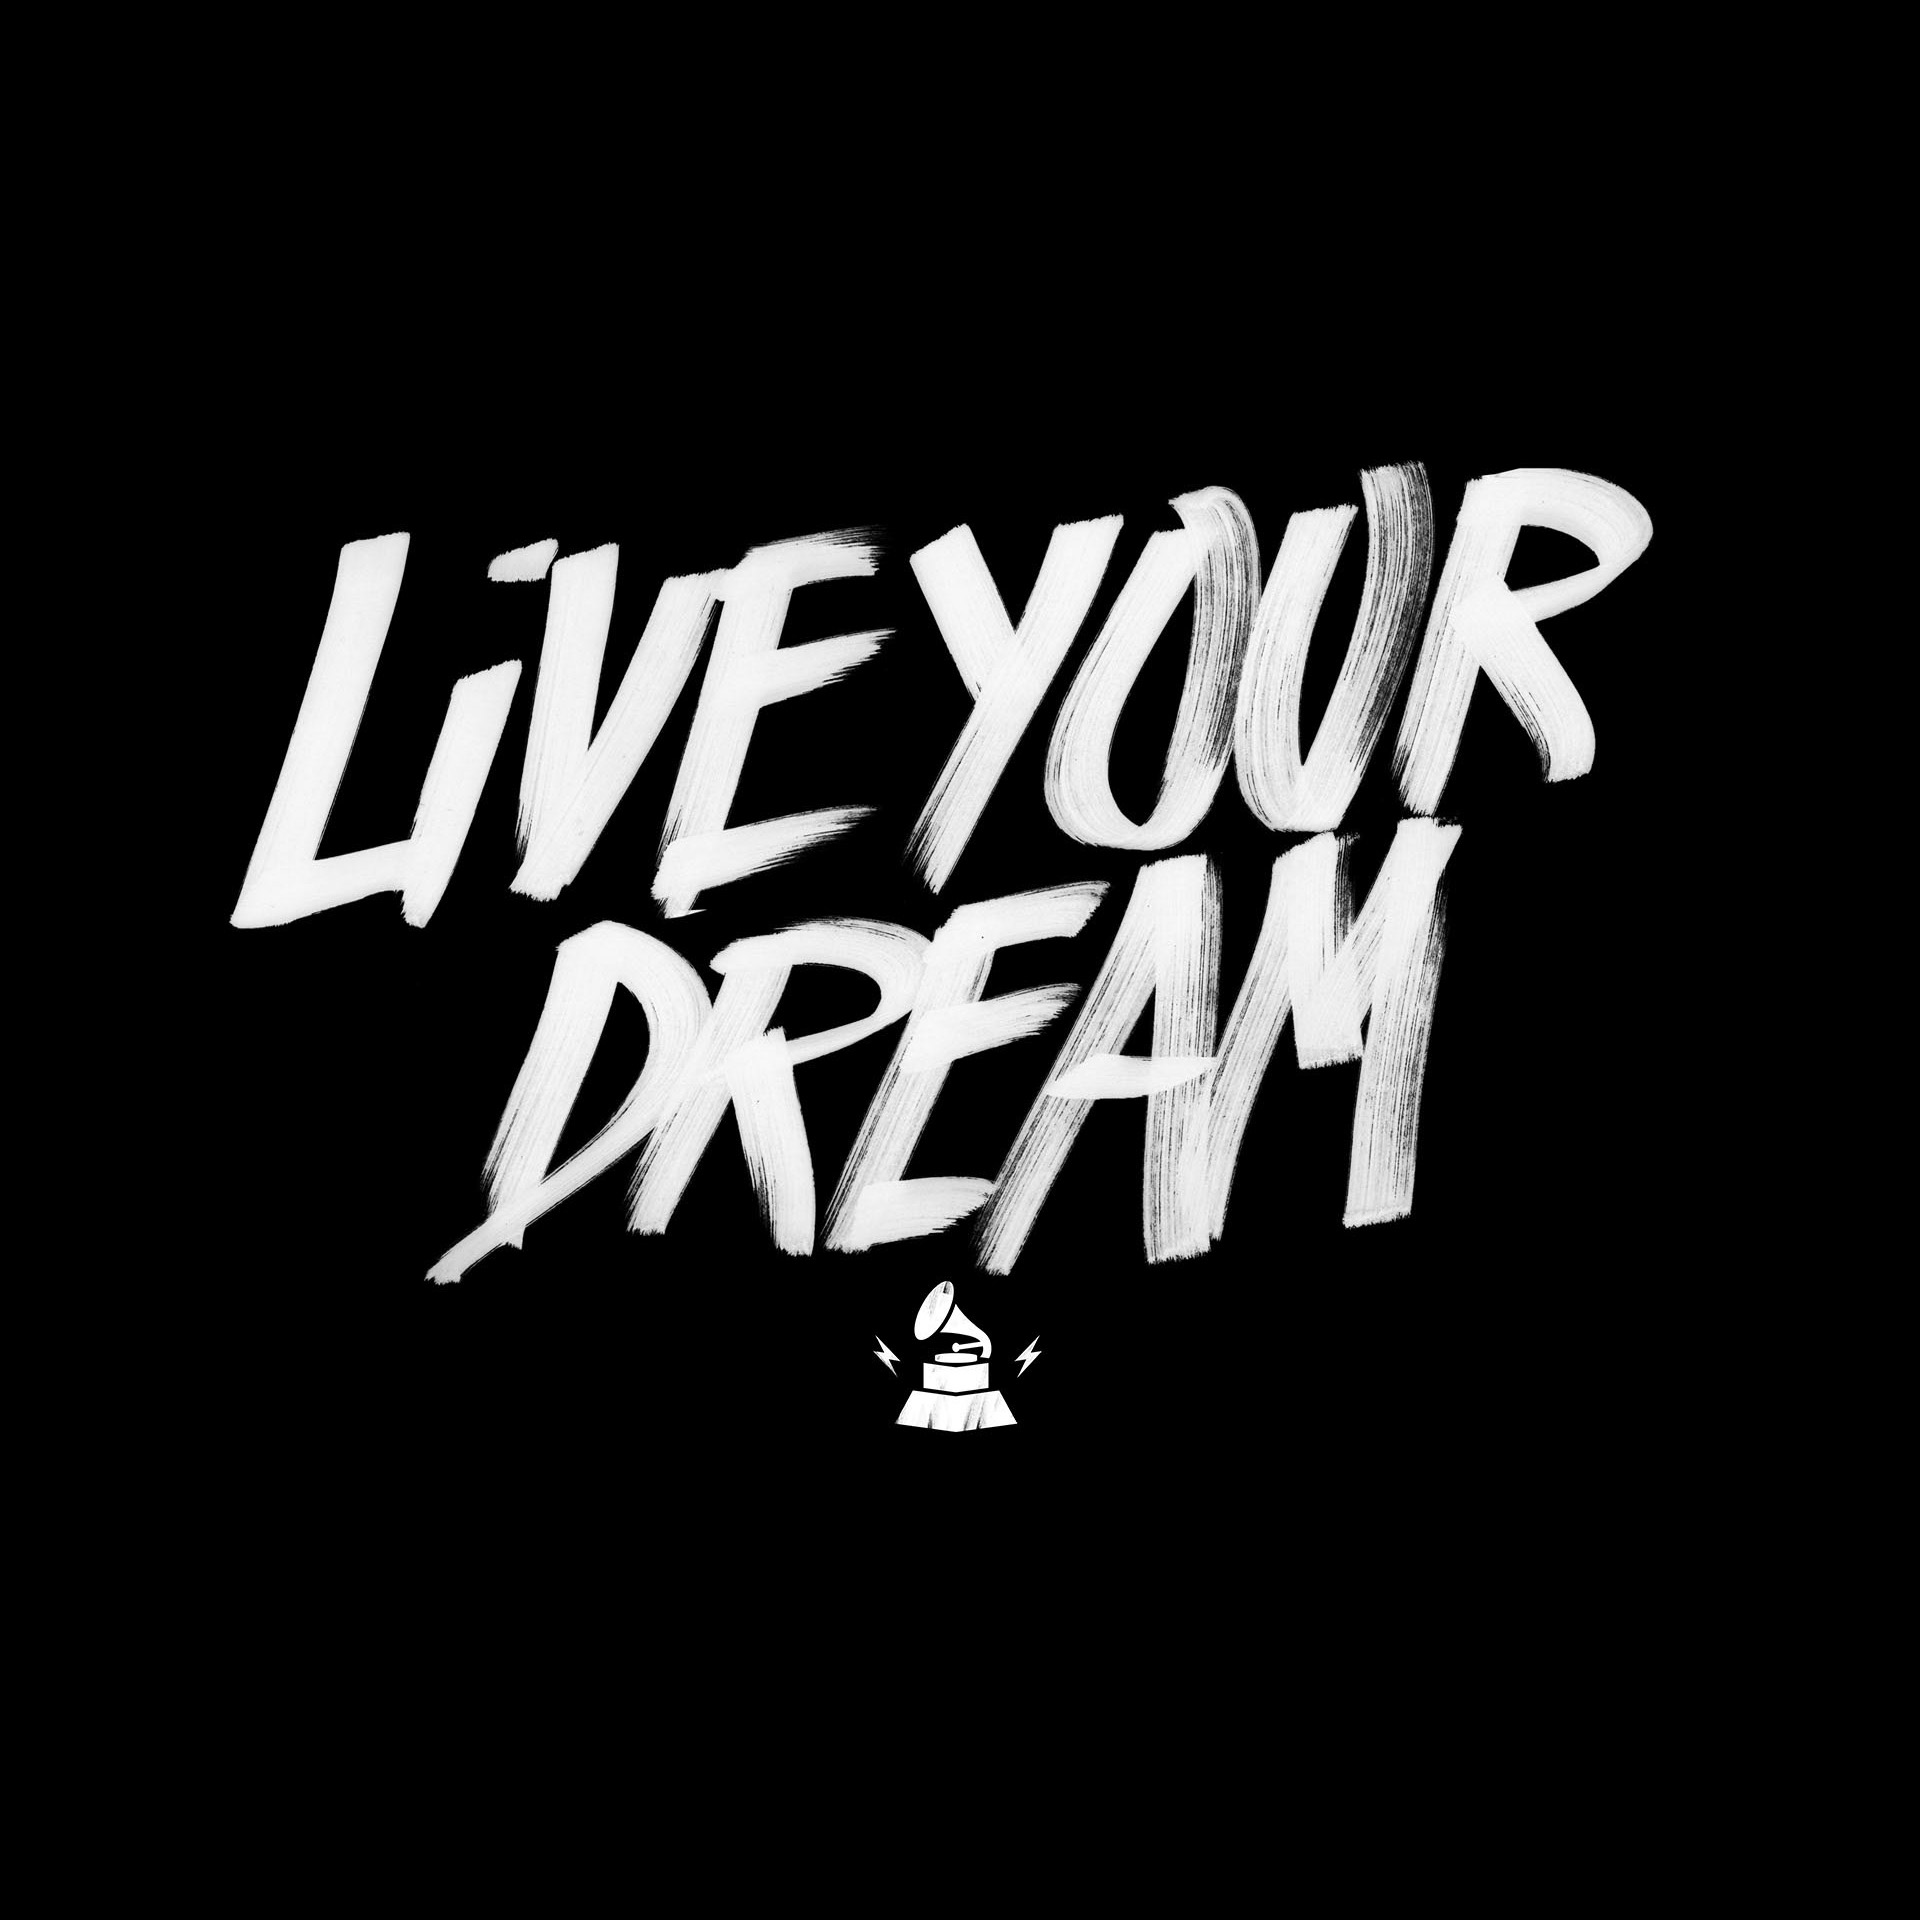 Bold, white brushstroke letters on a black background spell out "LIVE YOUR DREAM." A small icon of a rocket at the bottom adds emphasis to the motivational message.